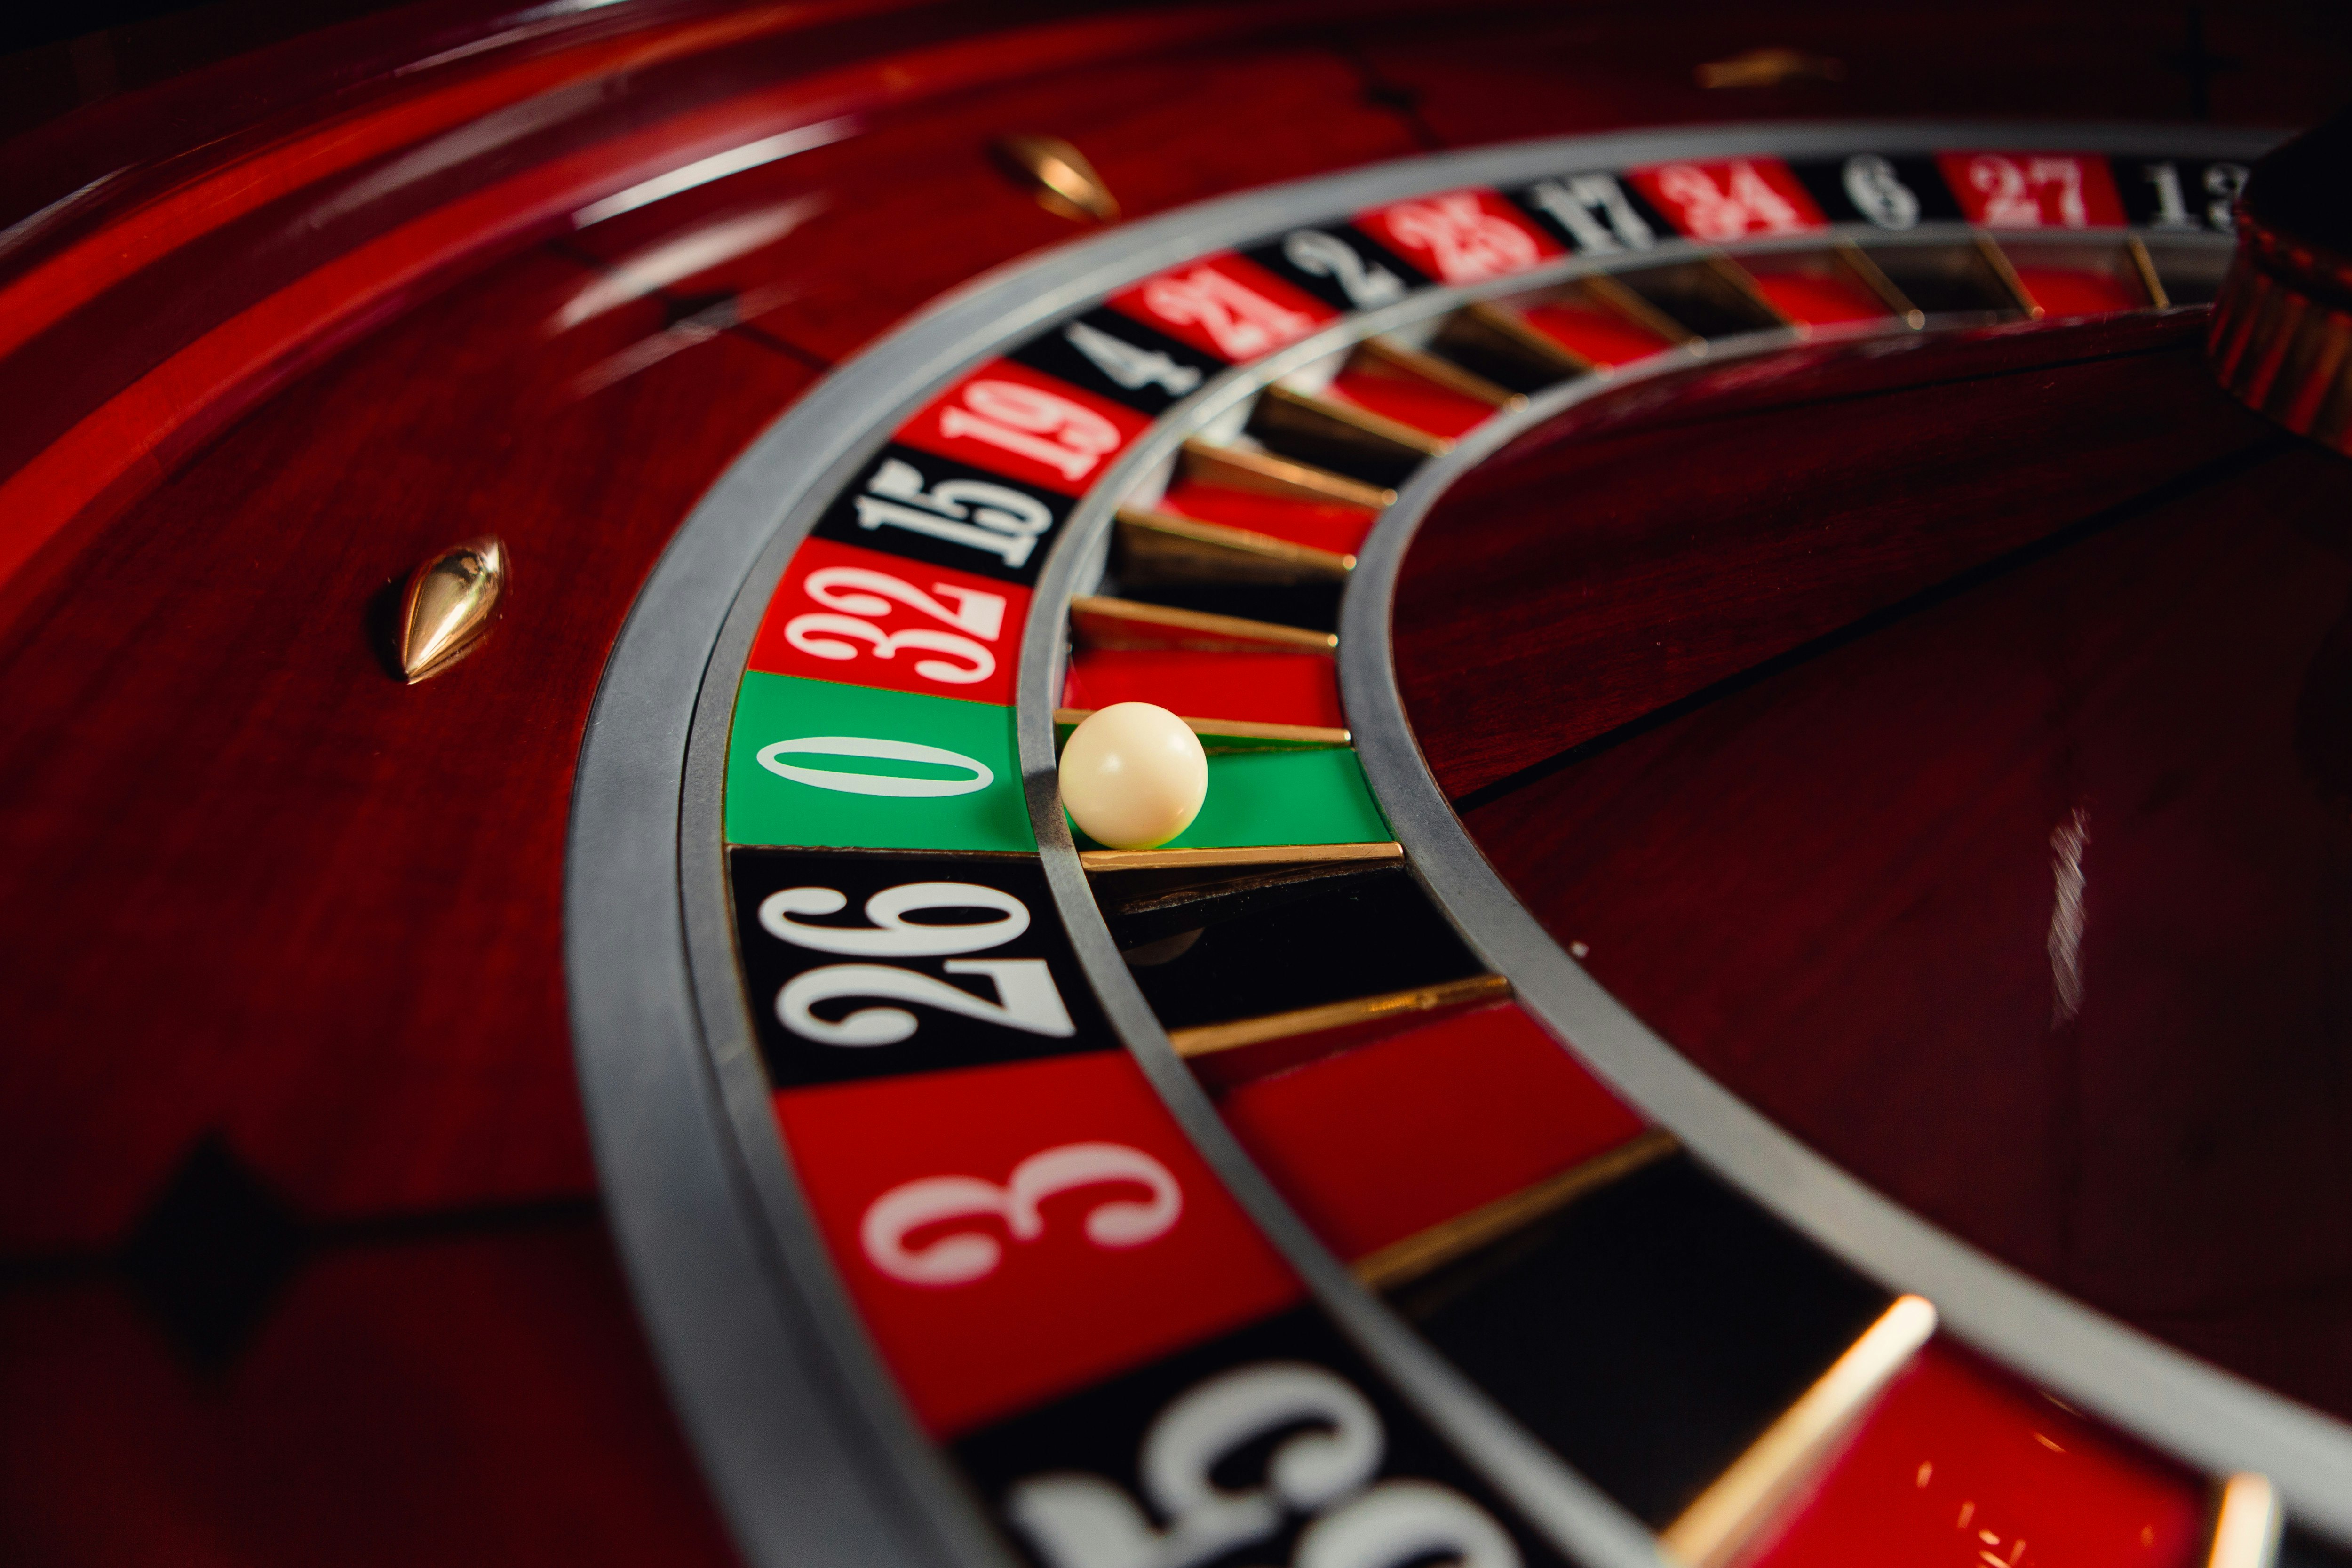 Roulette table layout explained: 3 different types of roulette